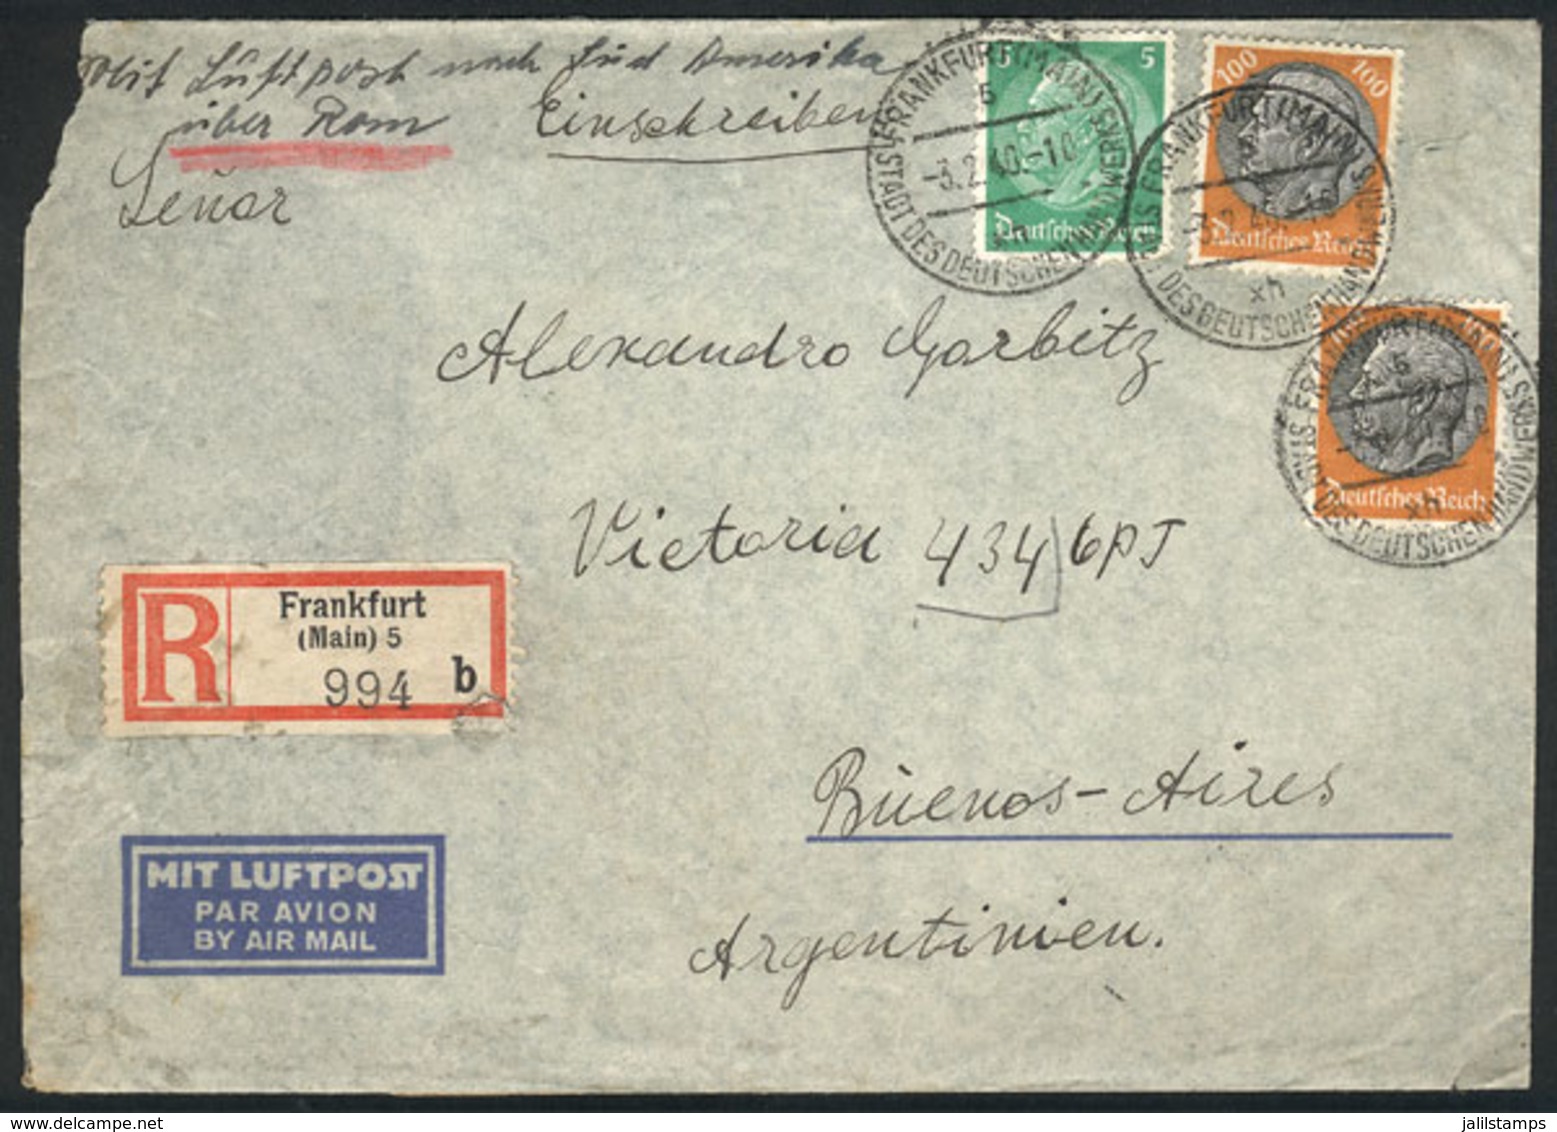 GERMANY: Registered Airmail Cover (with Original Letter Included) Sent From Frankfurt To Buenos Aires On 3/FE/1940, Fran - Prephilately